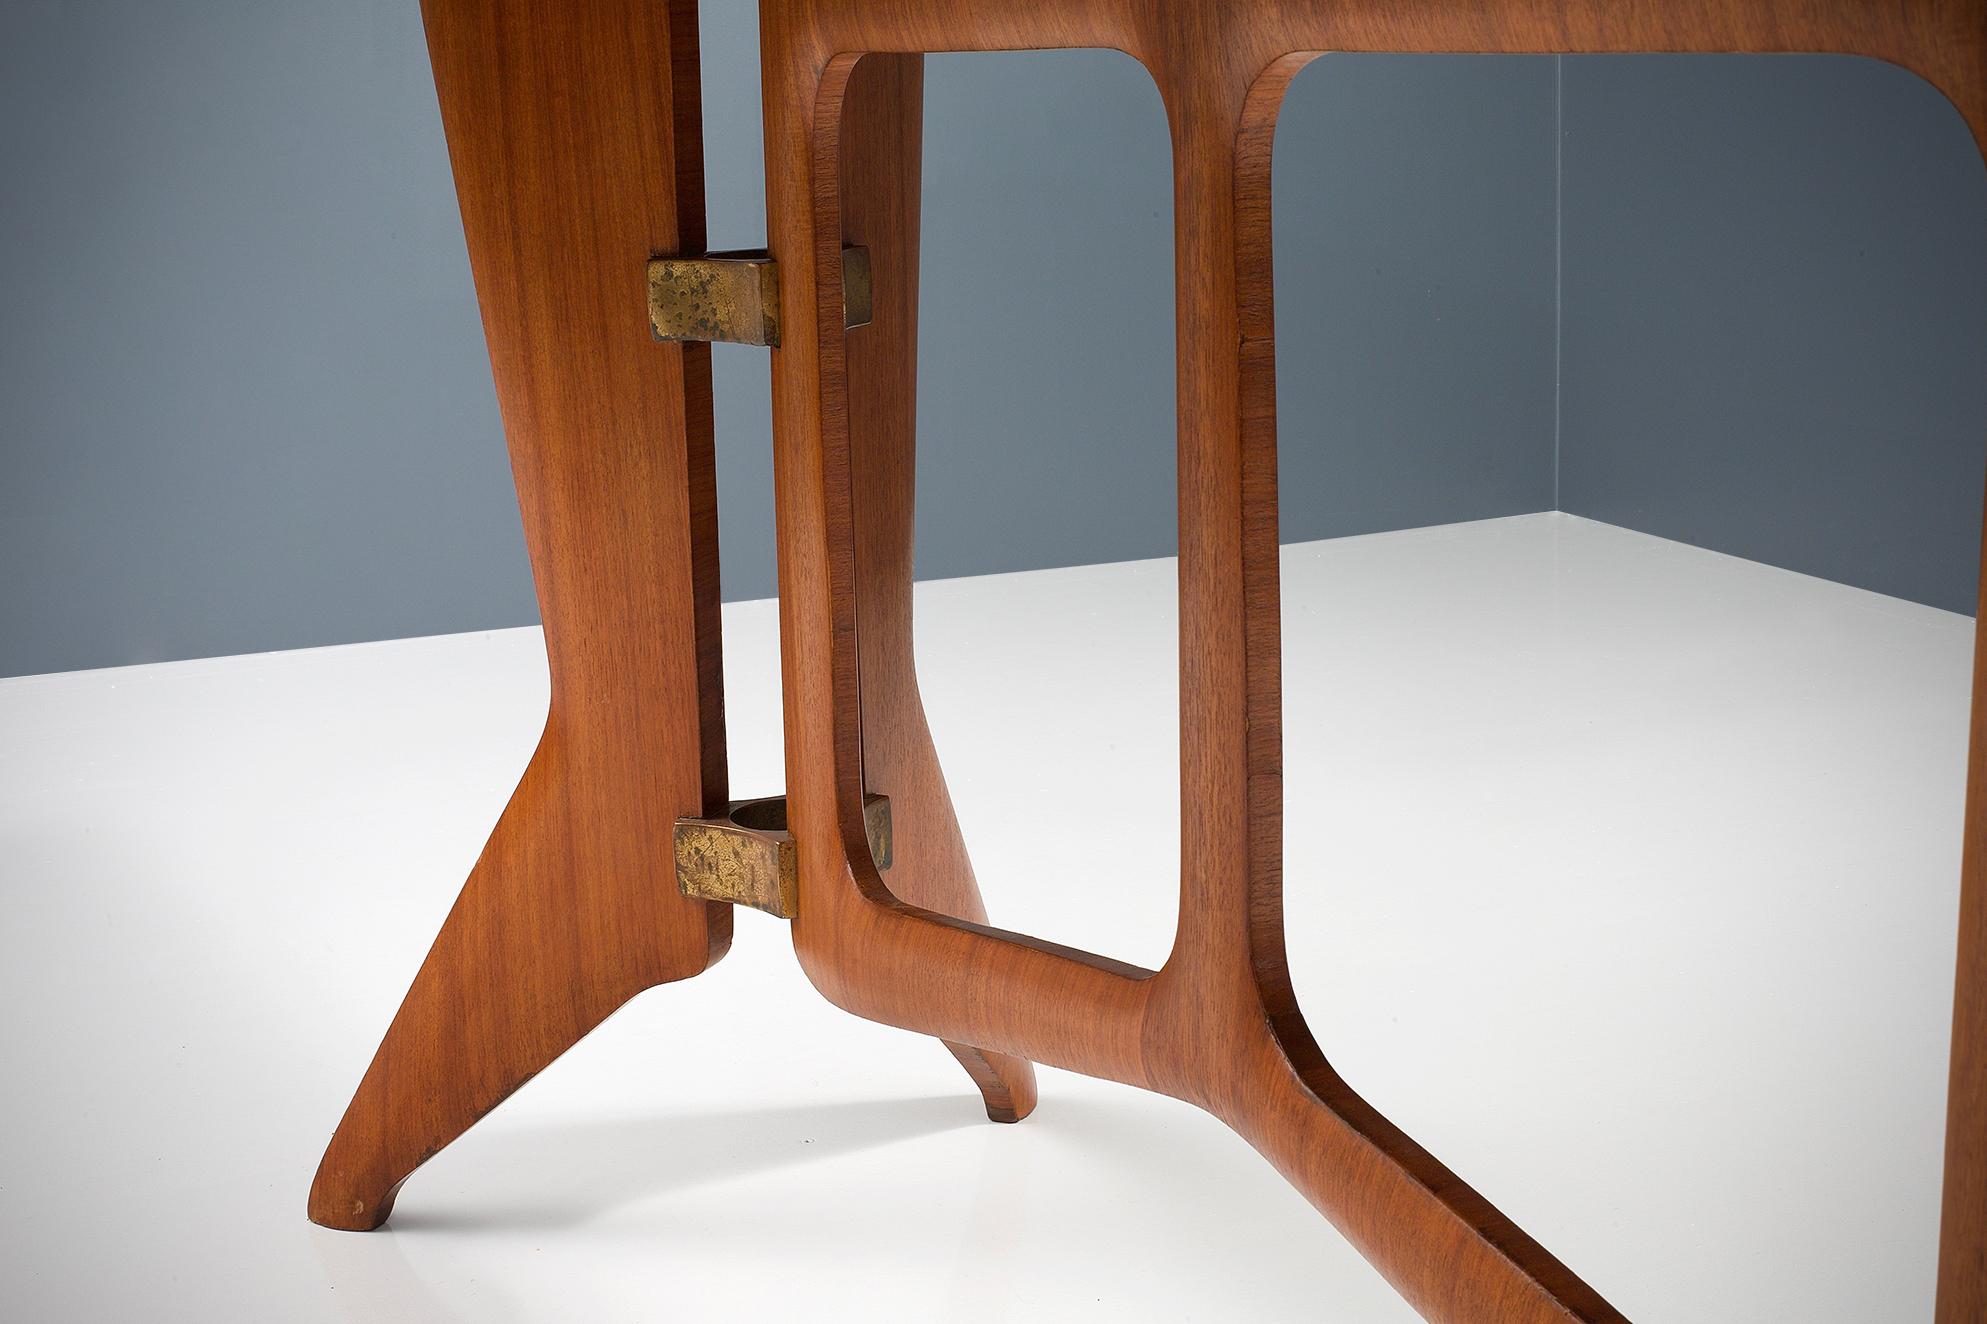 Italian Sculptural  Dining Table by Ariberto Colombo in Teak, Brass and Glass, 1950's For Sale